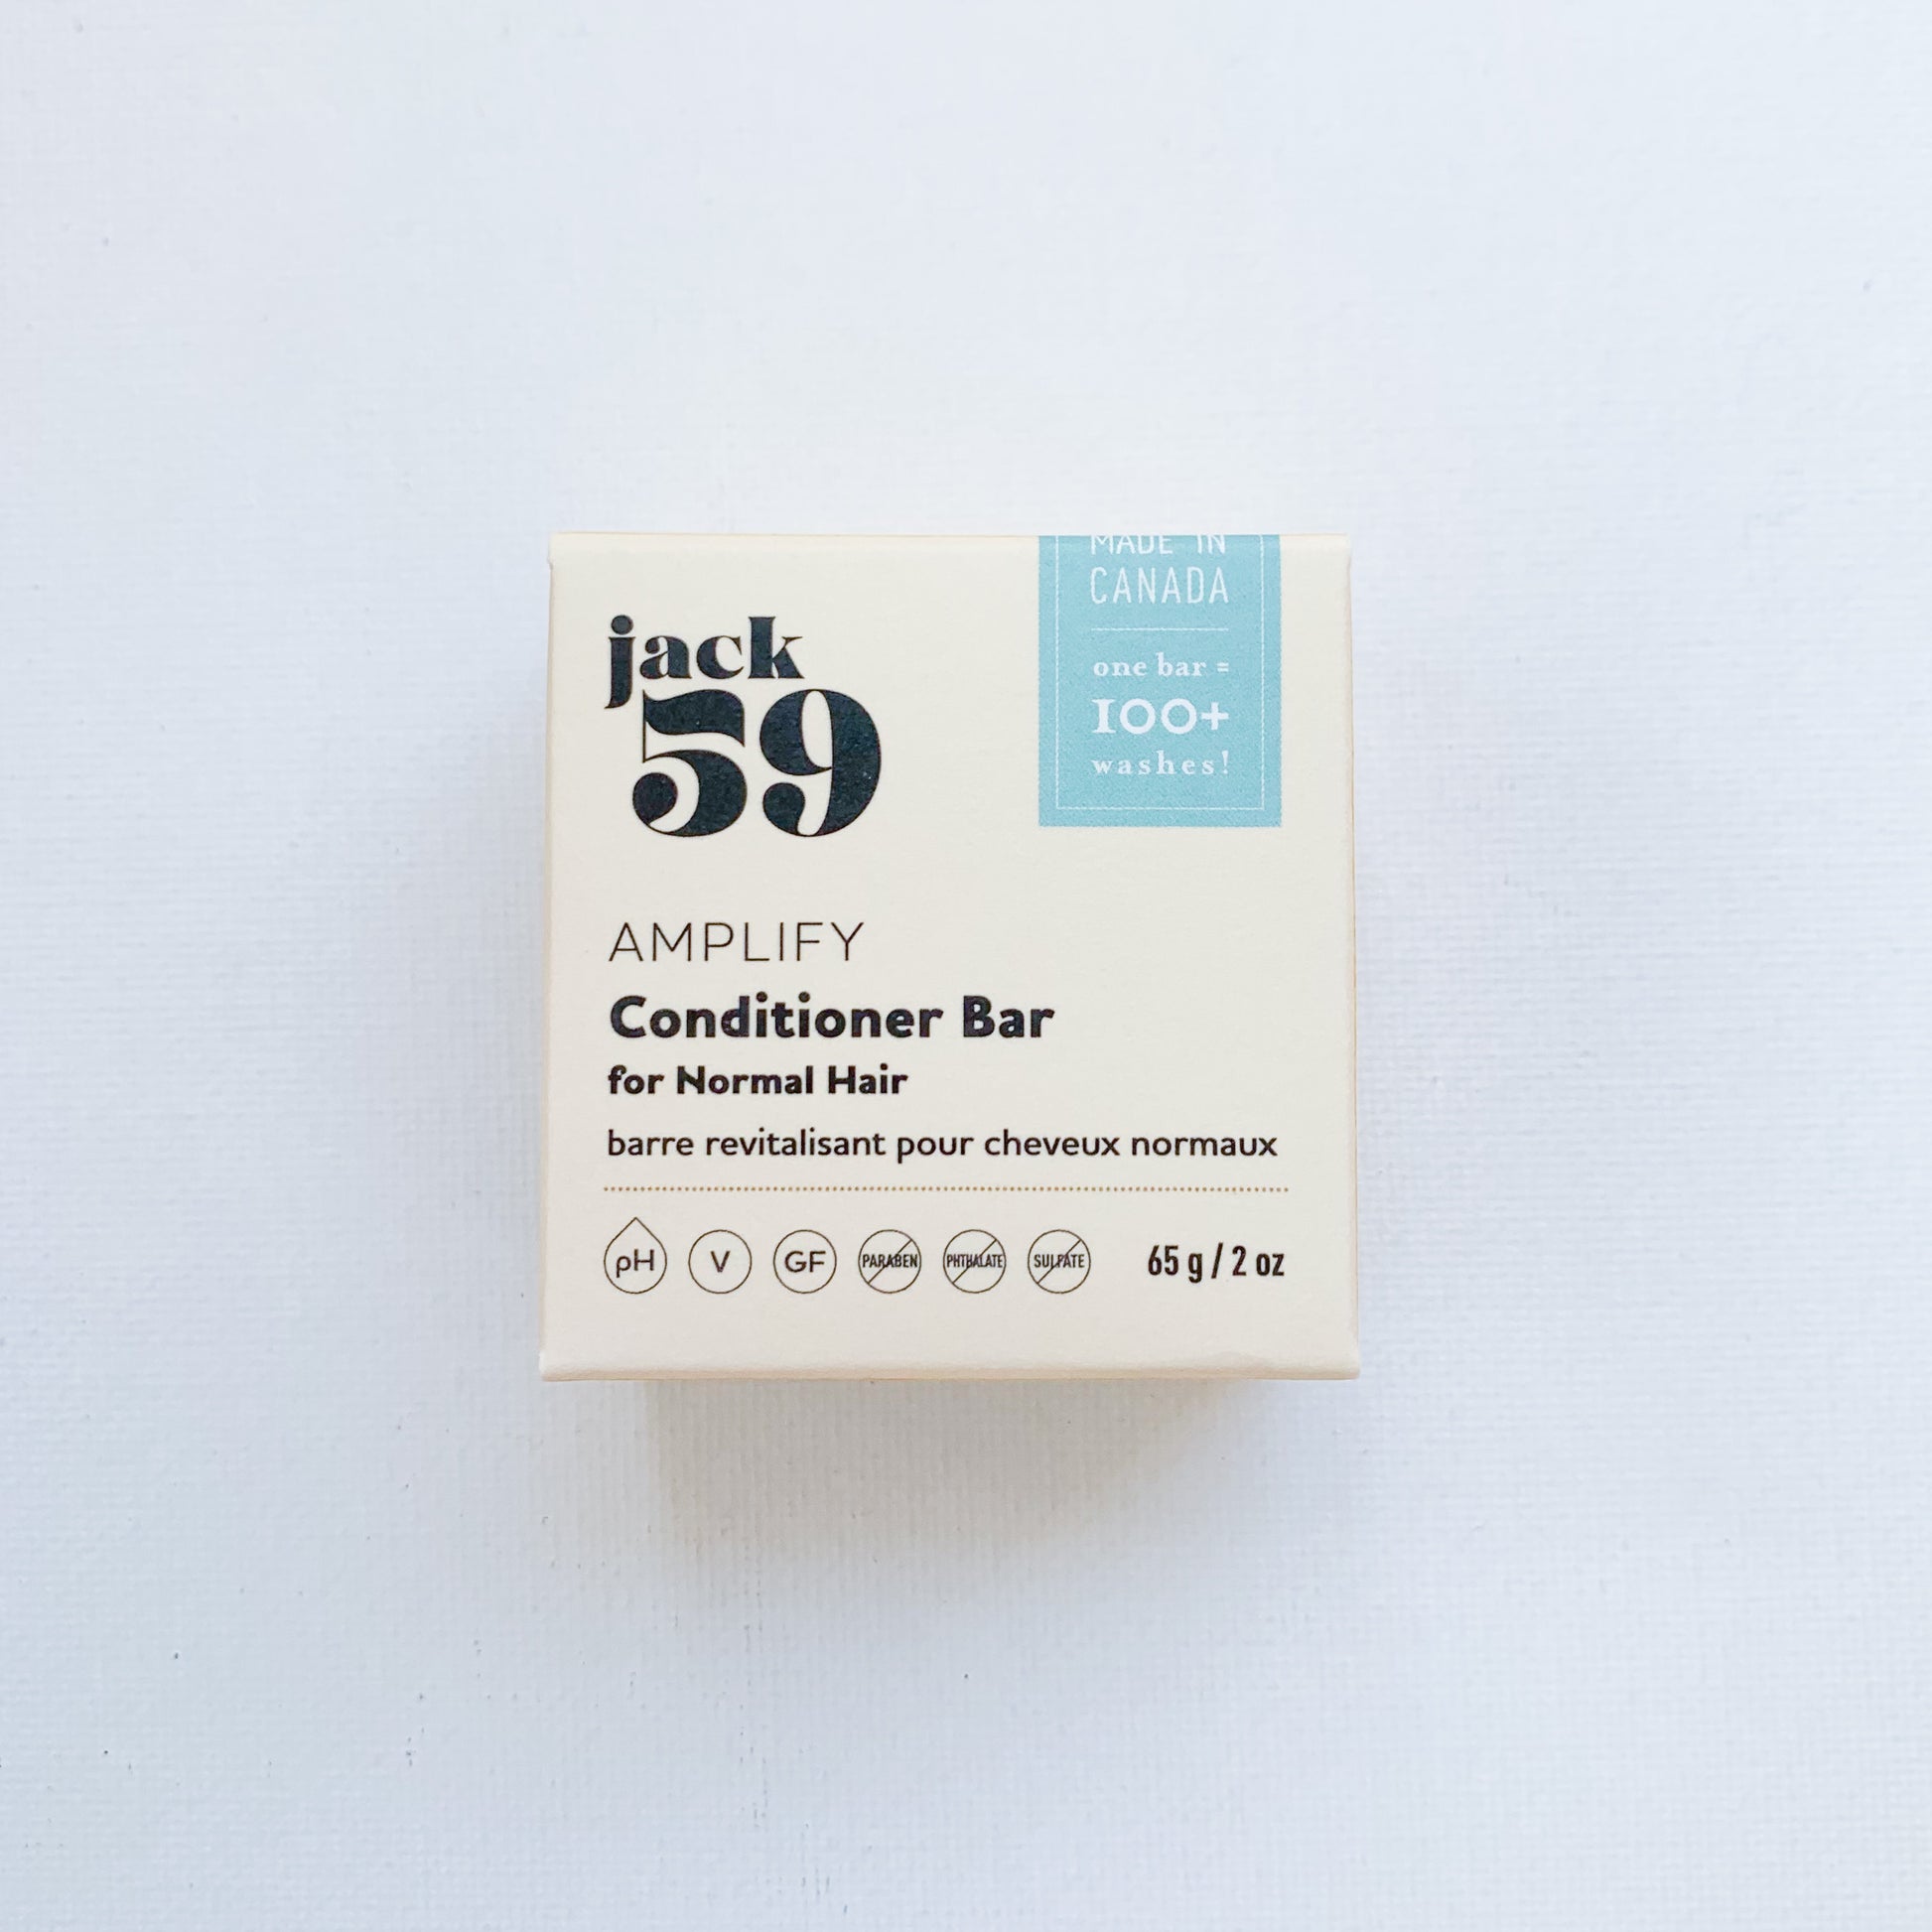 A square, light yellow box with the text 'Jack59 Amplify Conditioner Bar for Normal Hair' written on it in black.